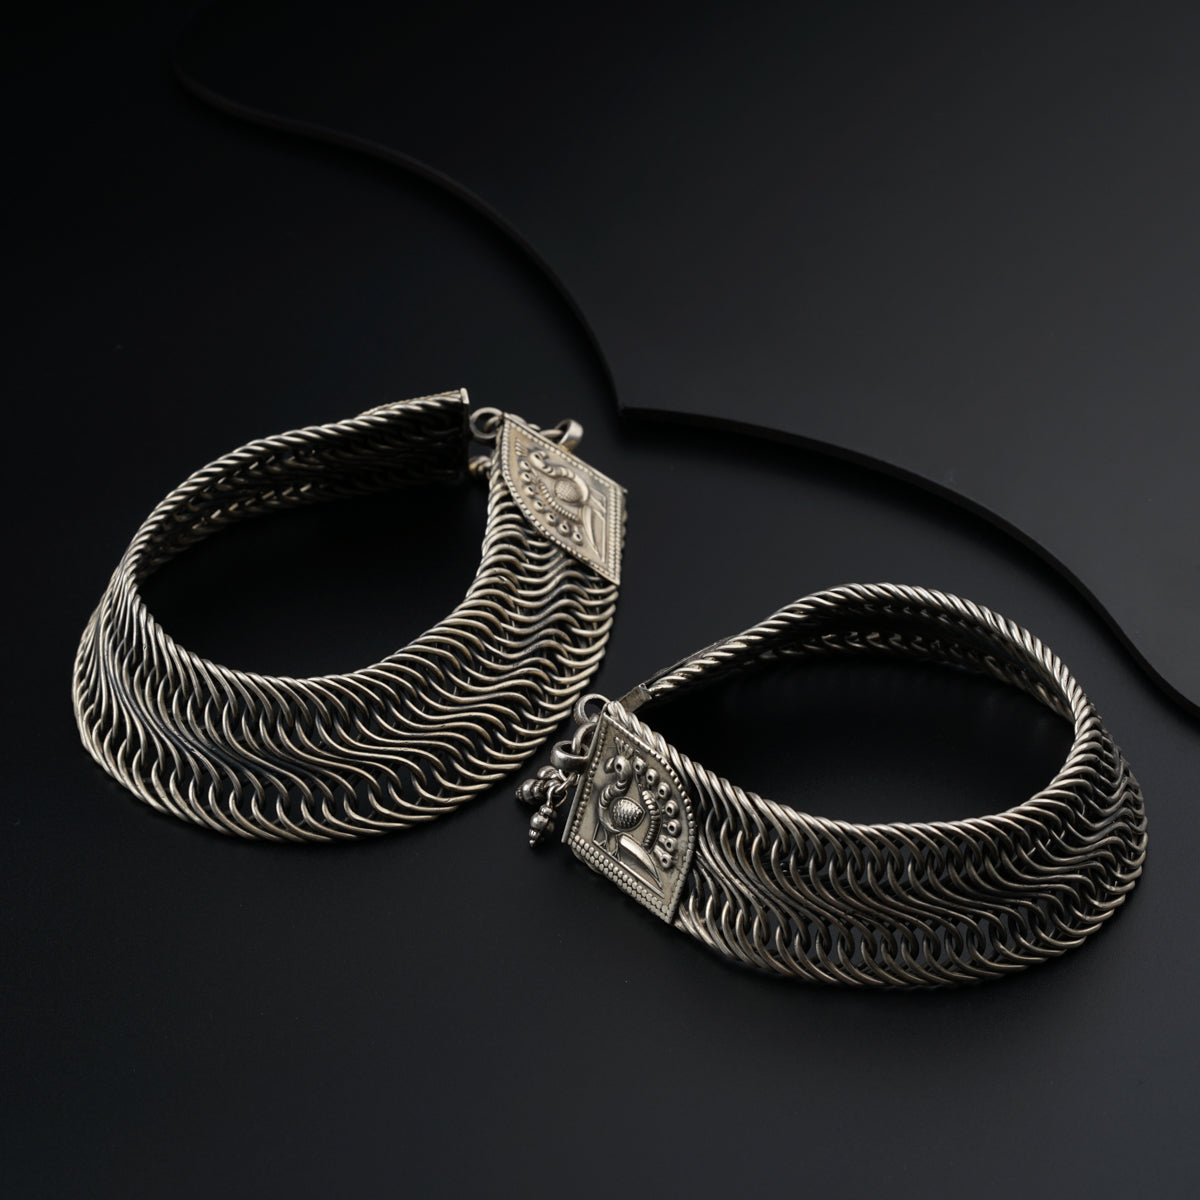 a pair of silver bracelets on a black surface